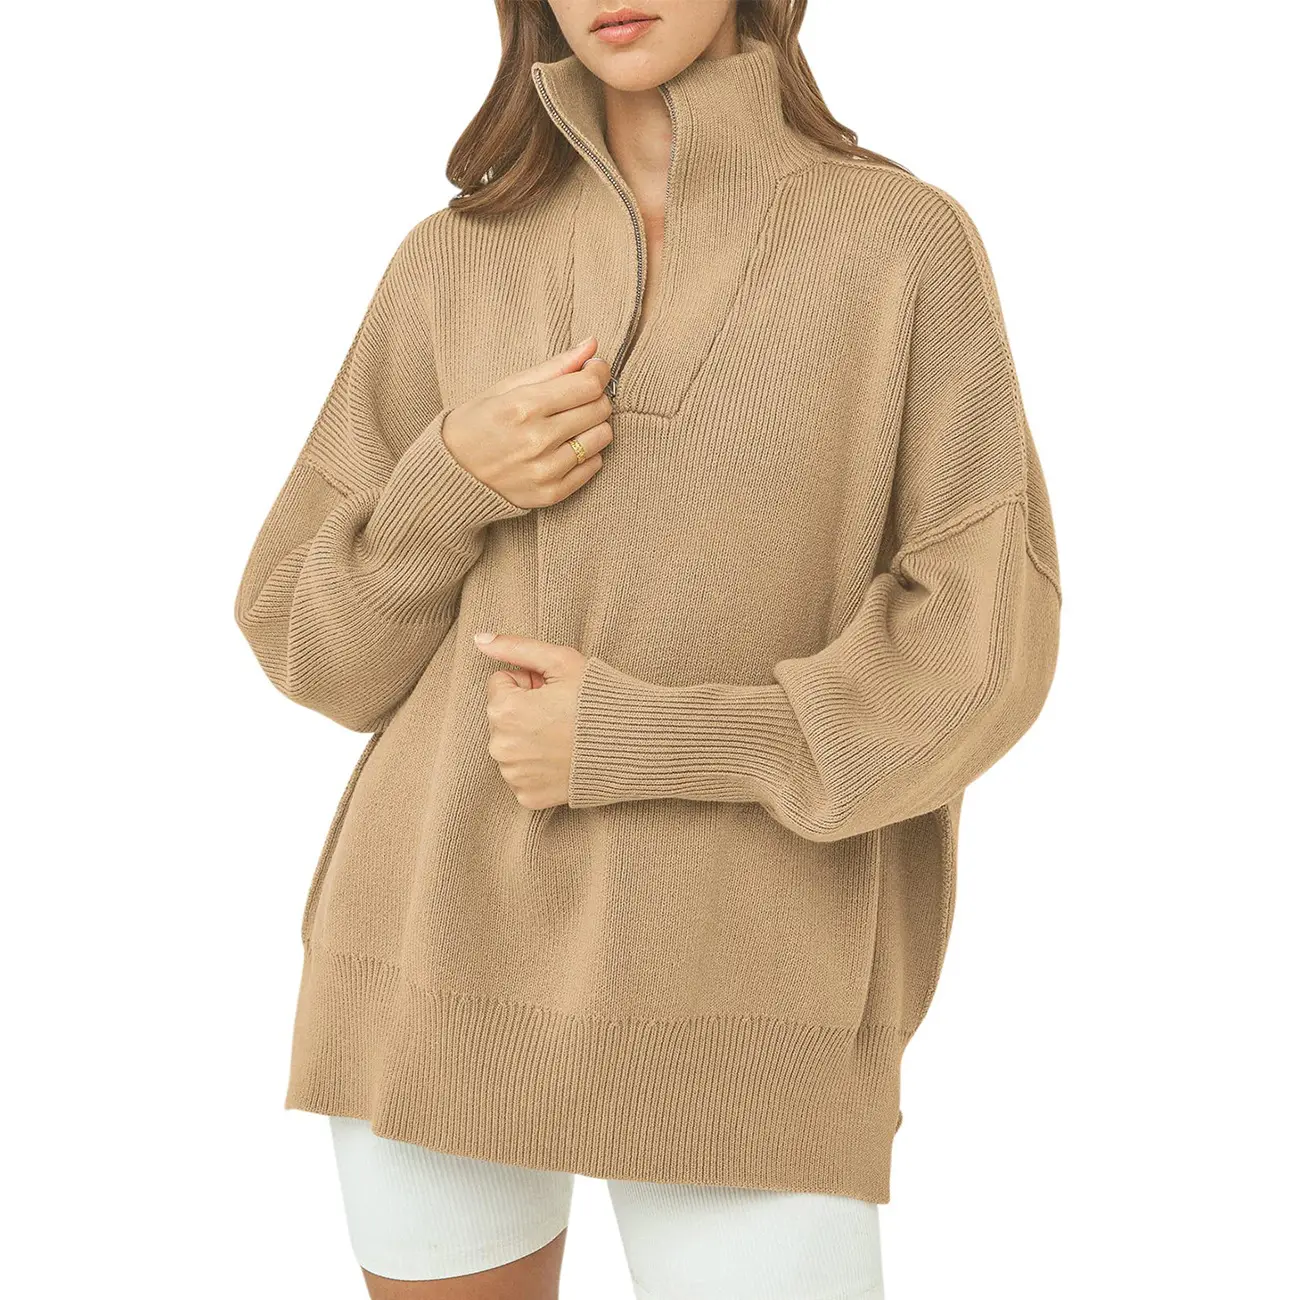 Autumn and winter women's long sleeve 1/4 zipper pullover split solid color sweater long sleeve sweater core spun yarn pullover